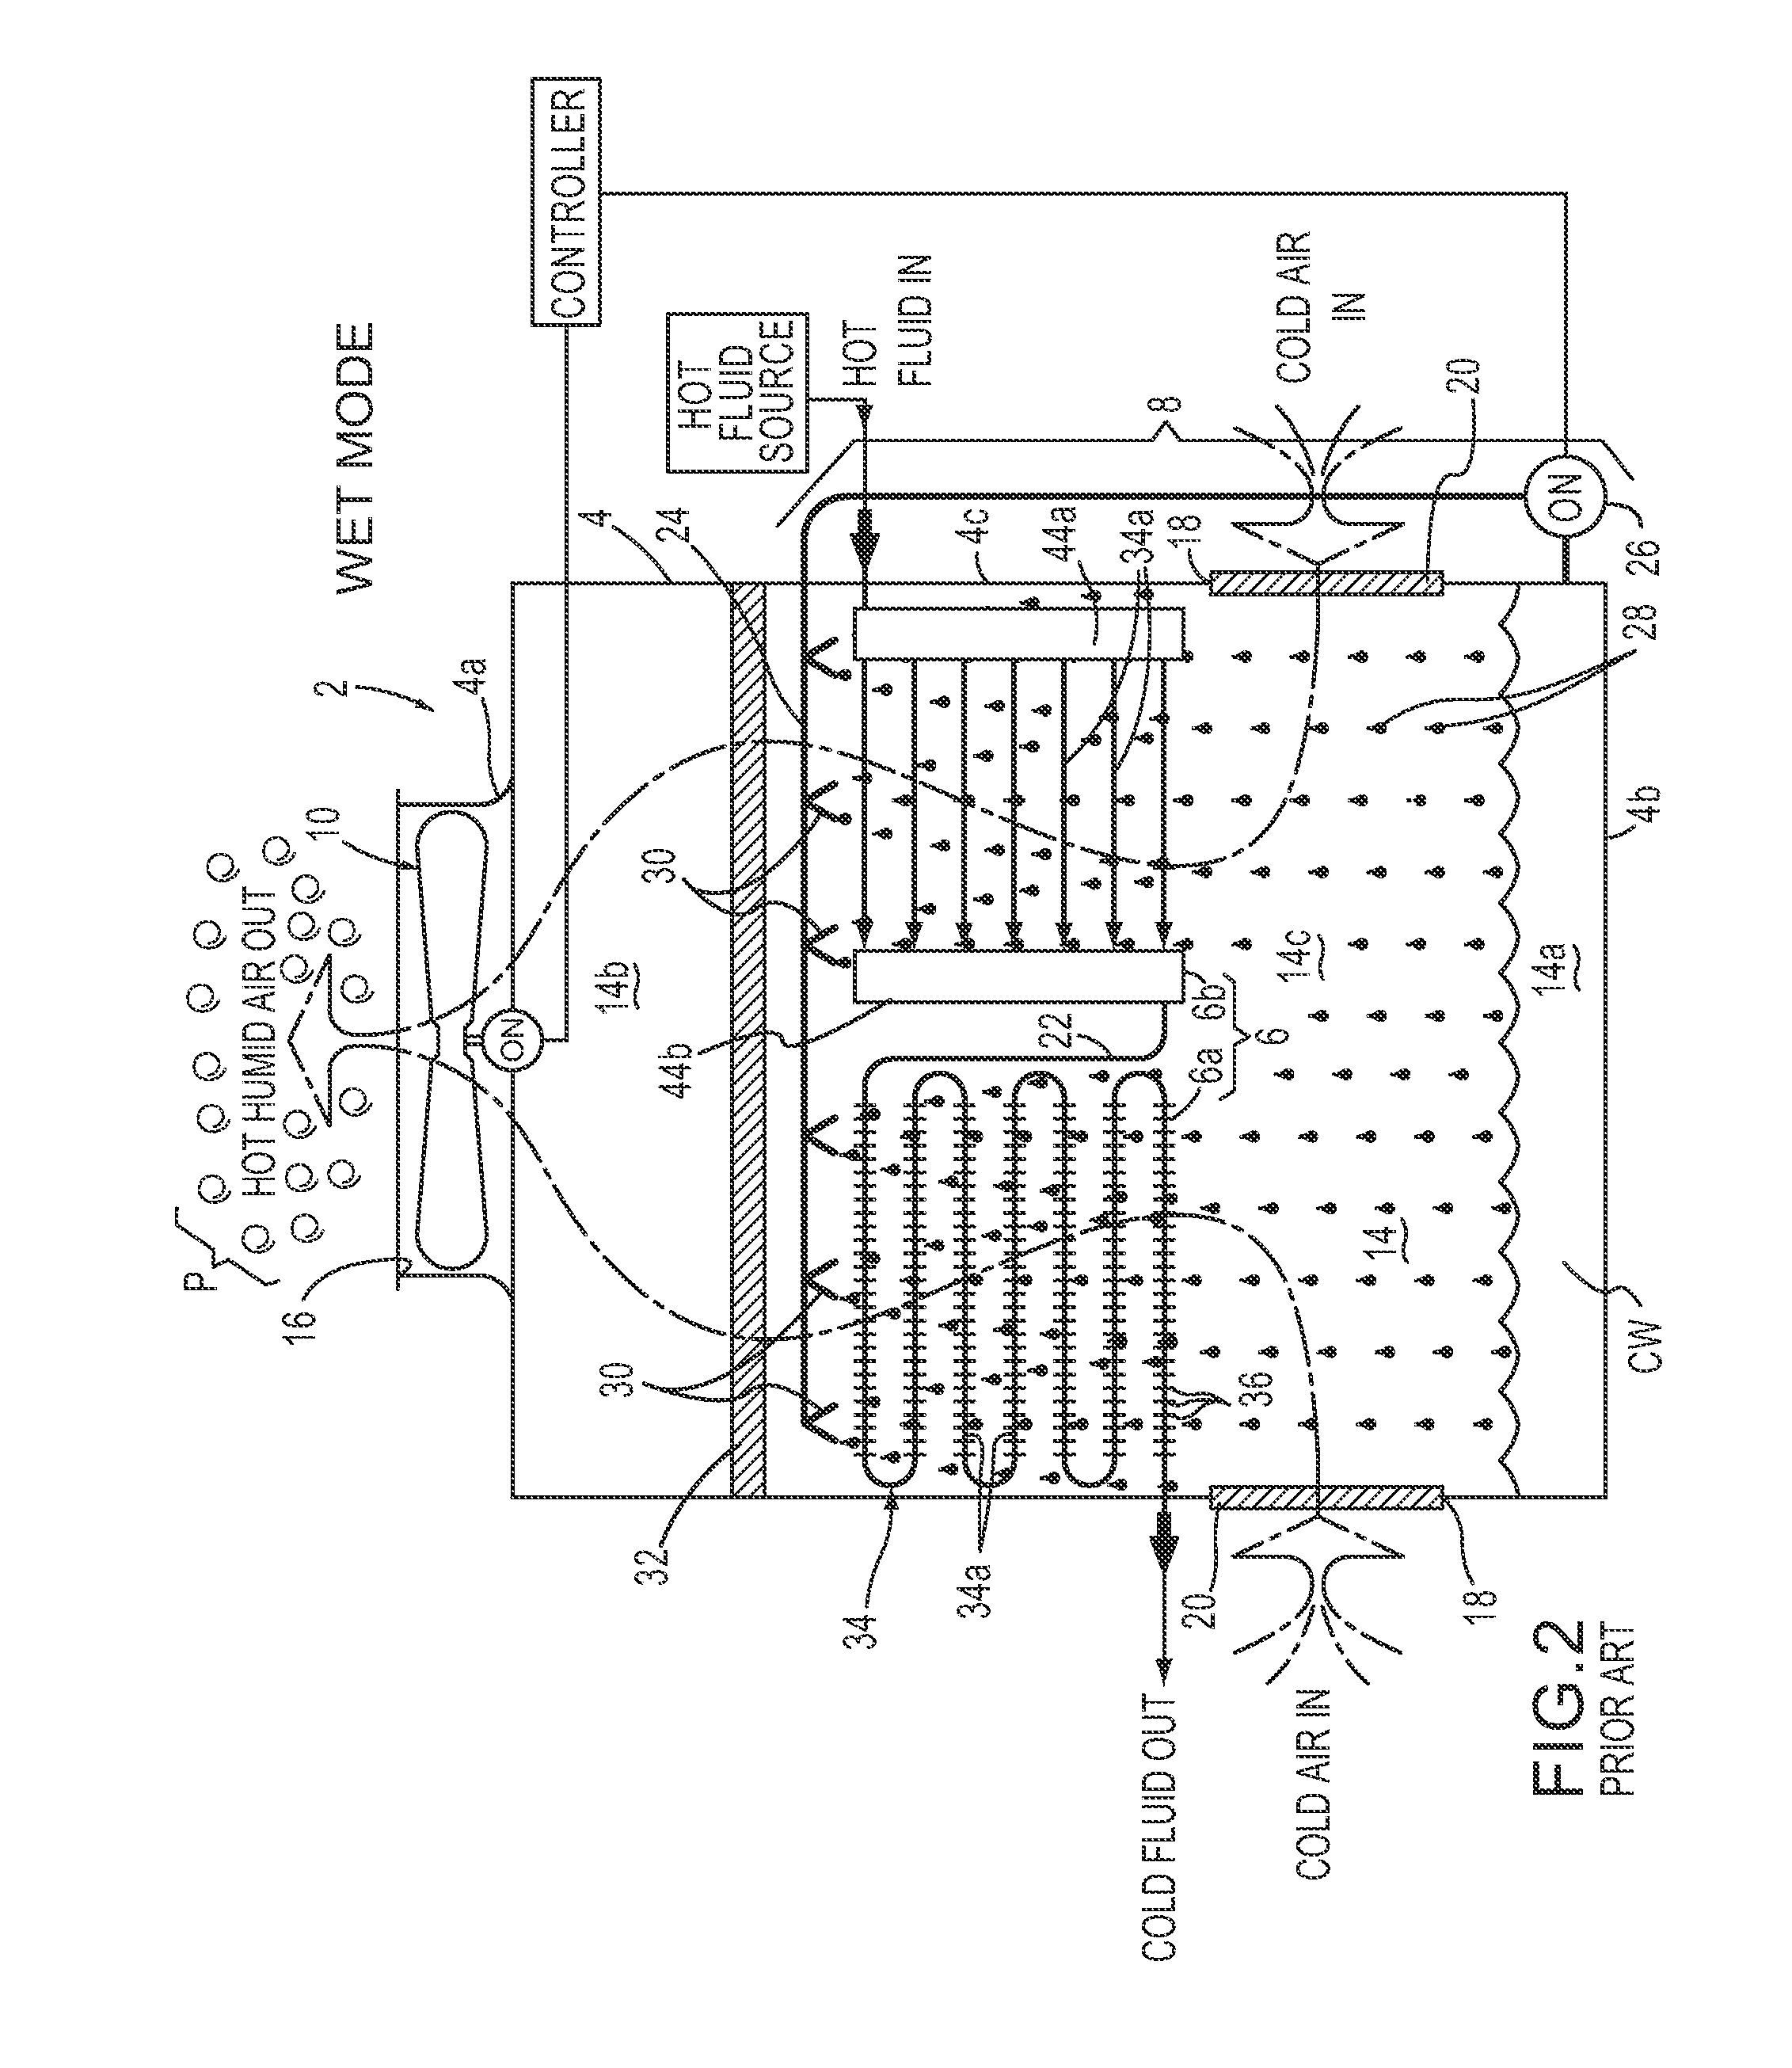 Hybrid heat exchanger apparatus and method of operating the same